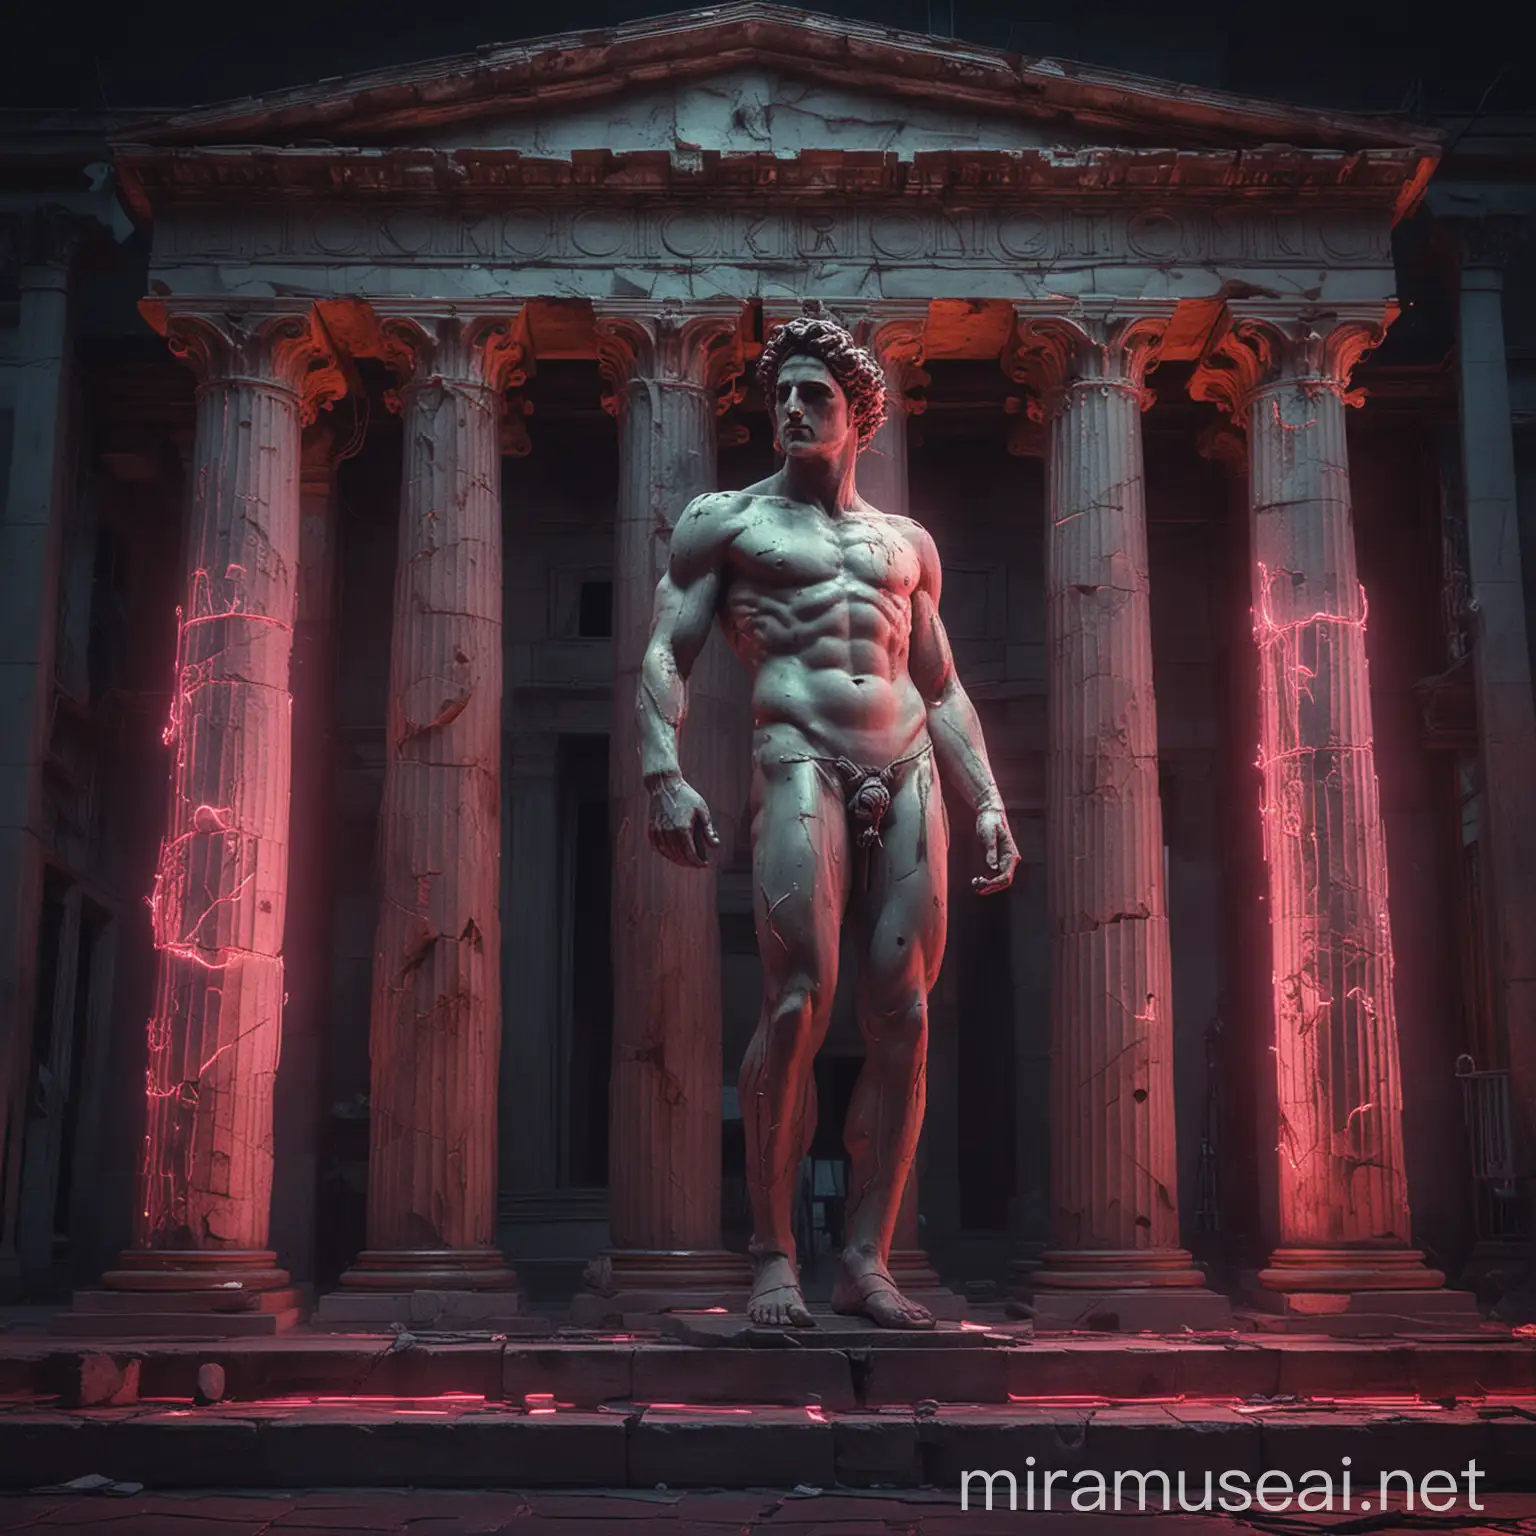 Create a sculpture of a Greek god, surrounded by Roman columns illuminated with vibrant neon colors creating a hypnotizing and avant-garde fusion between the past and the present.

The background must be a classic building from Greco-Roman culture and be bathed in neon lights in the Cyperpunk style.

Surrealist and cinematic visual trends.